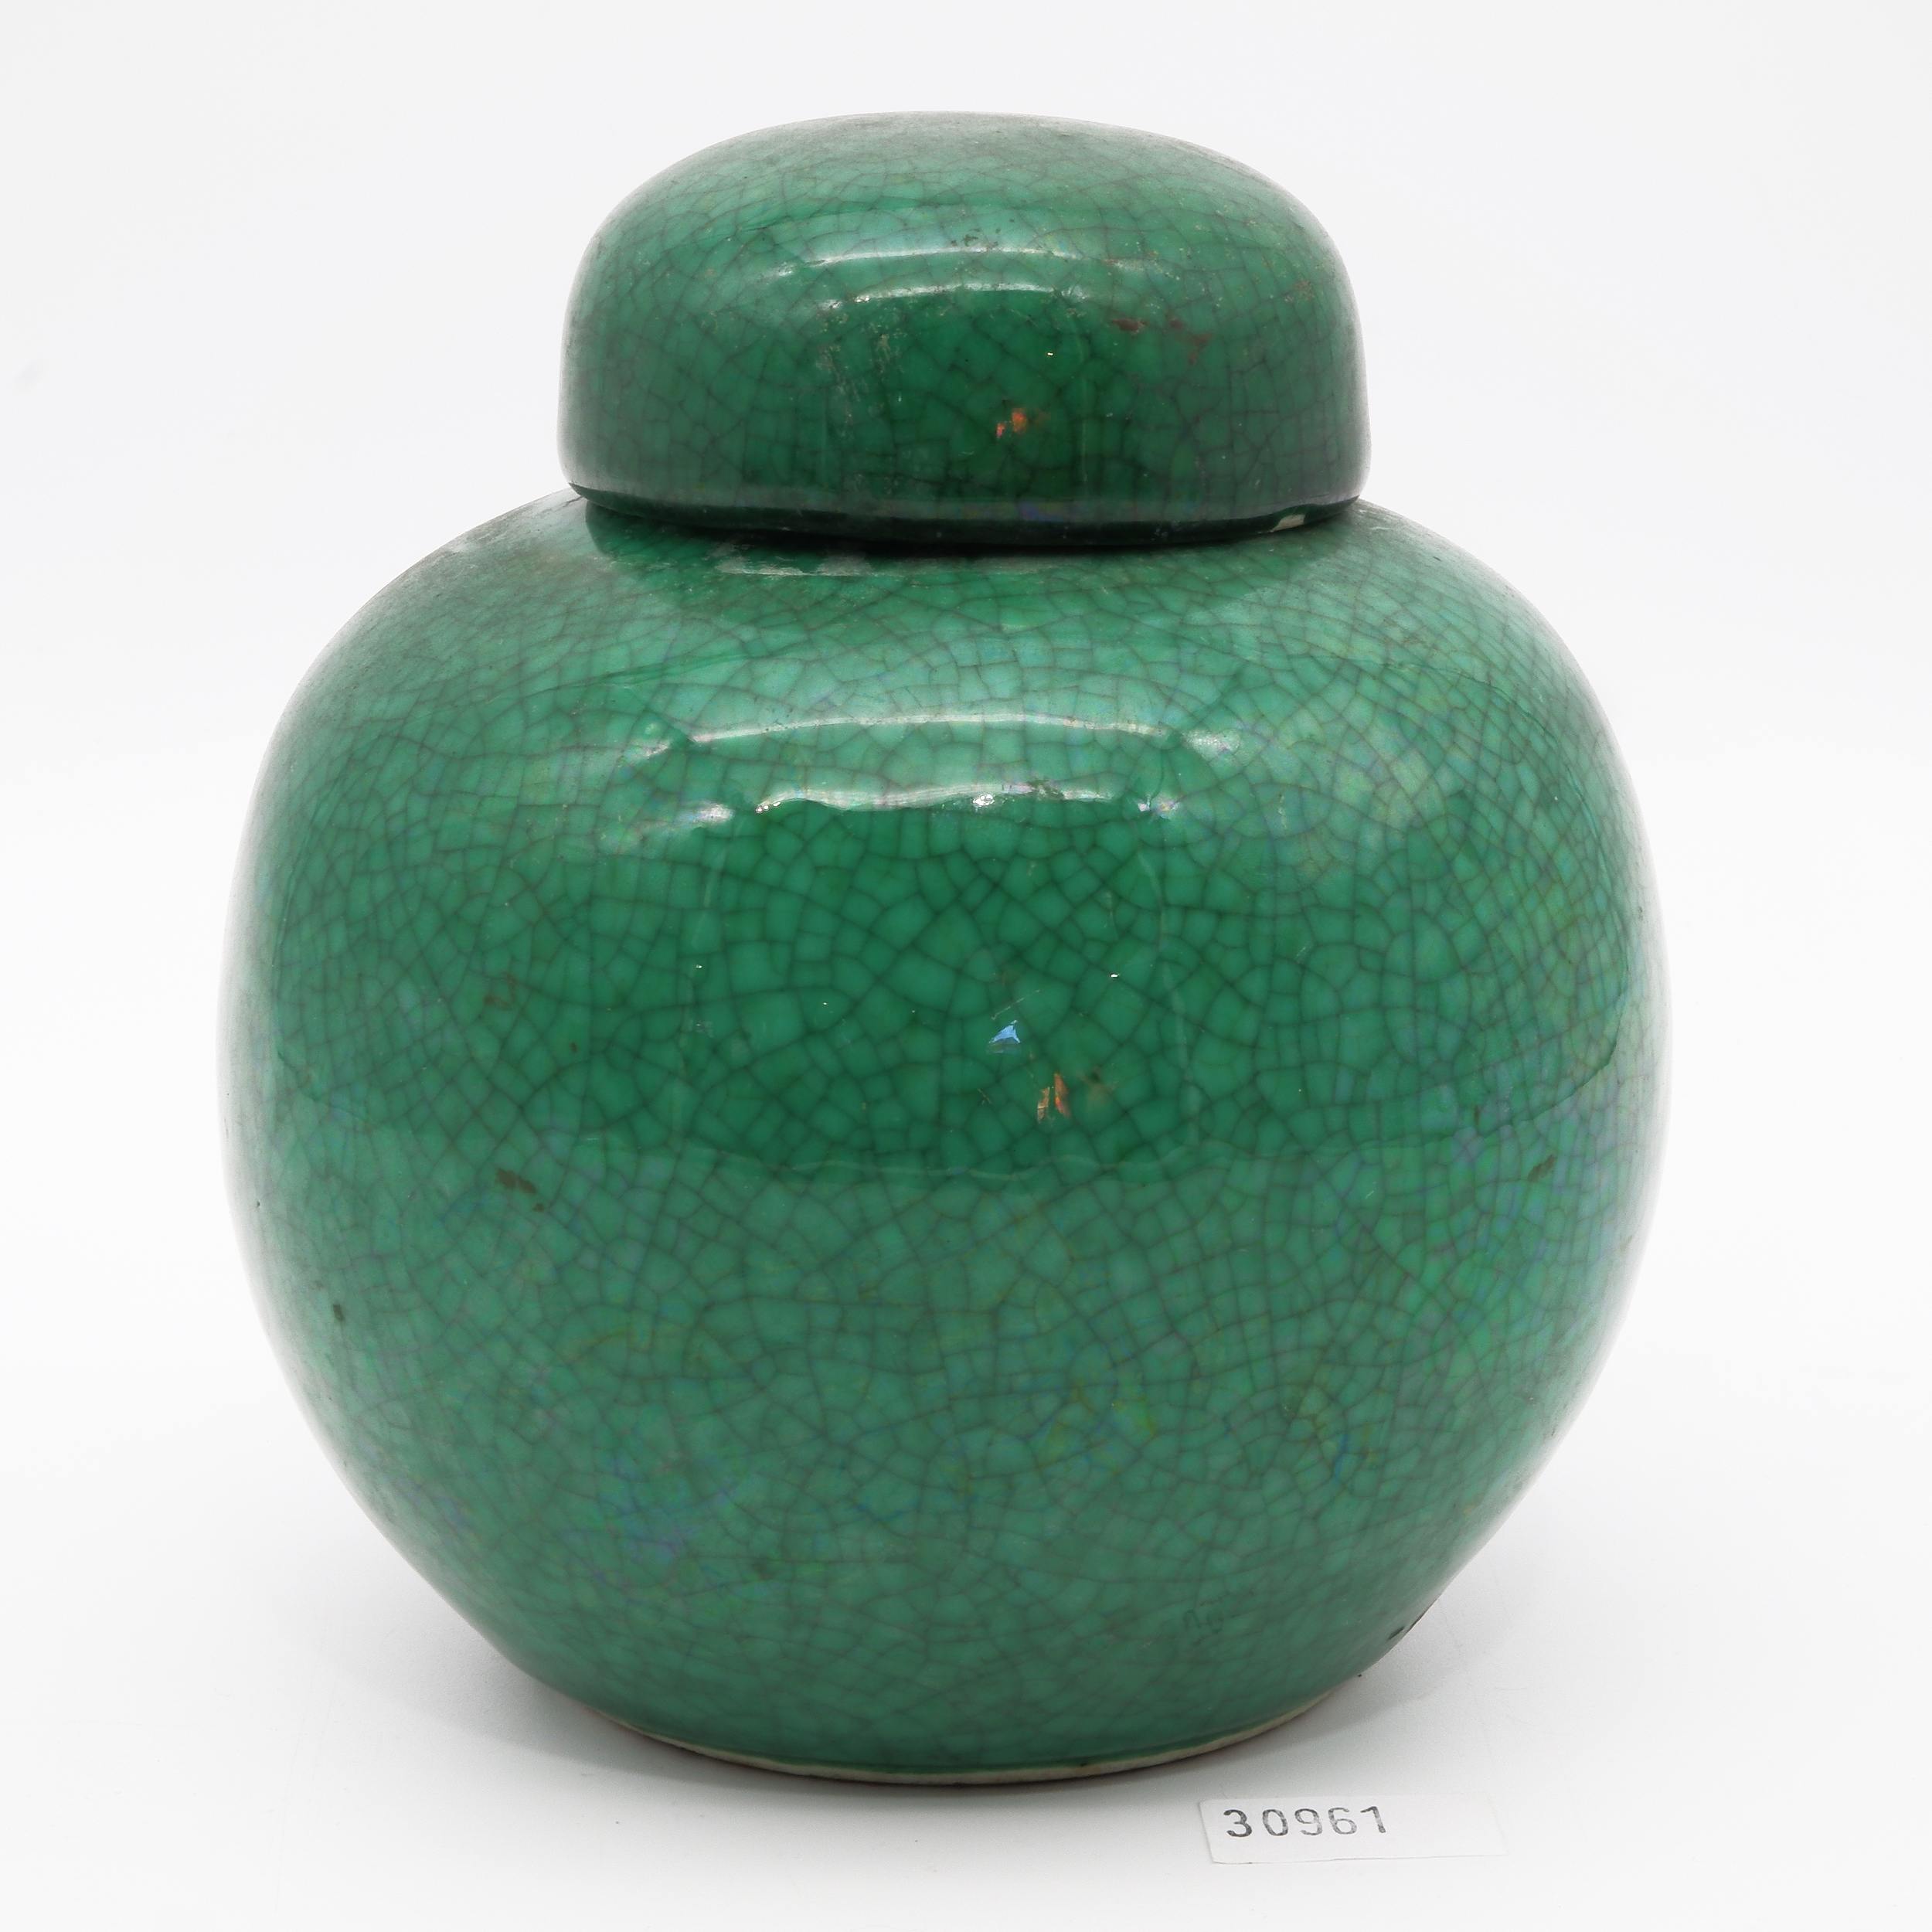 'Antique Chinese Crackle Green Glazed Porcelain Jar and Cover'